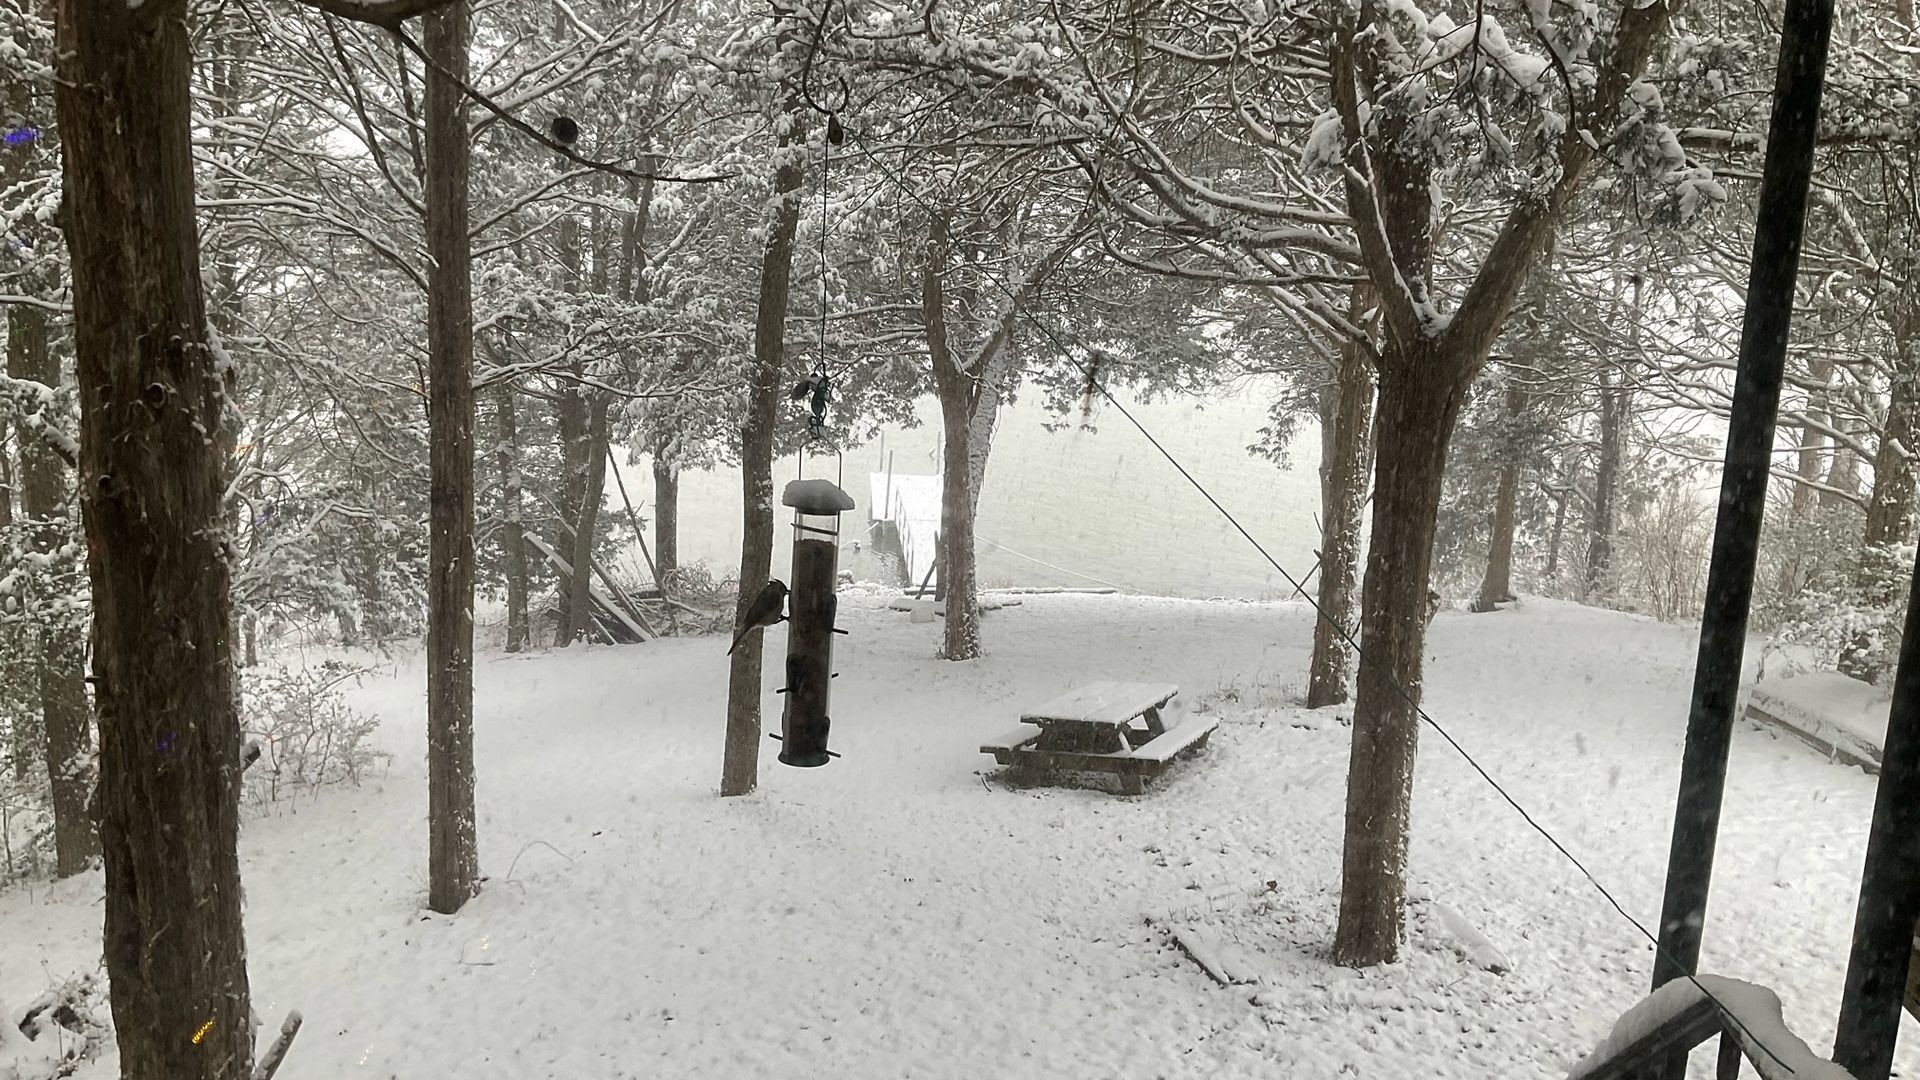 The snow at Old Hickory Lake